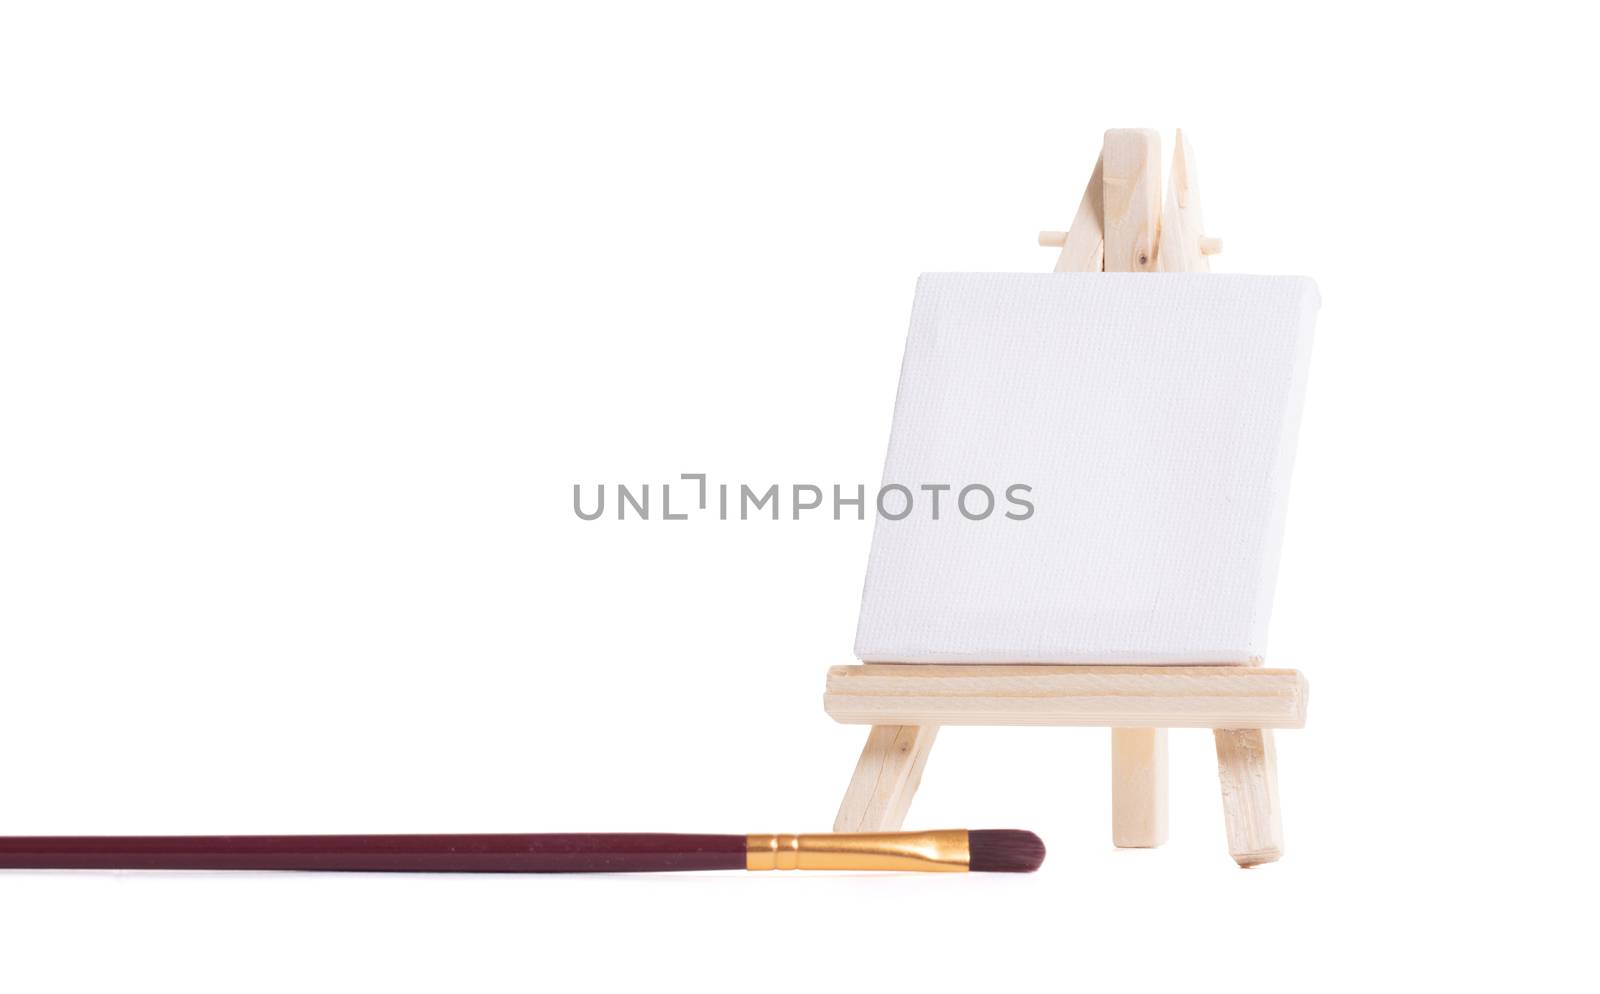 Miniature tripod for painting by michaklootwijk